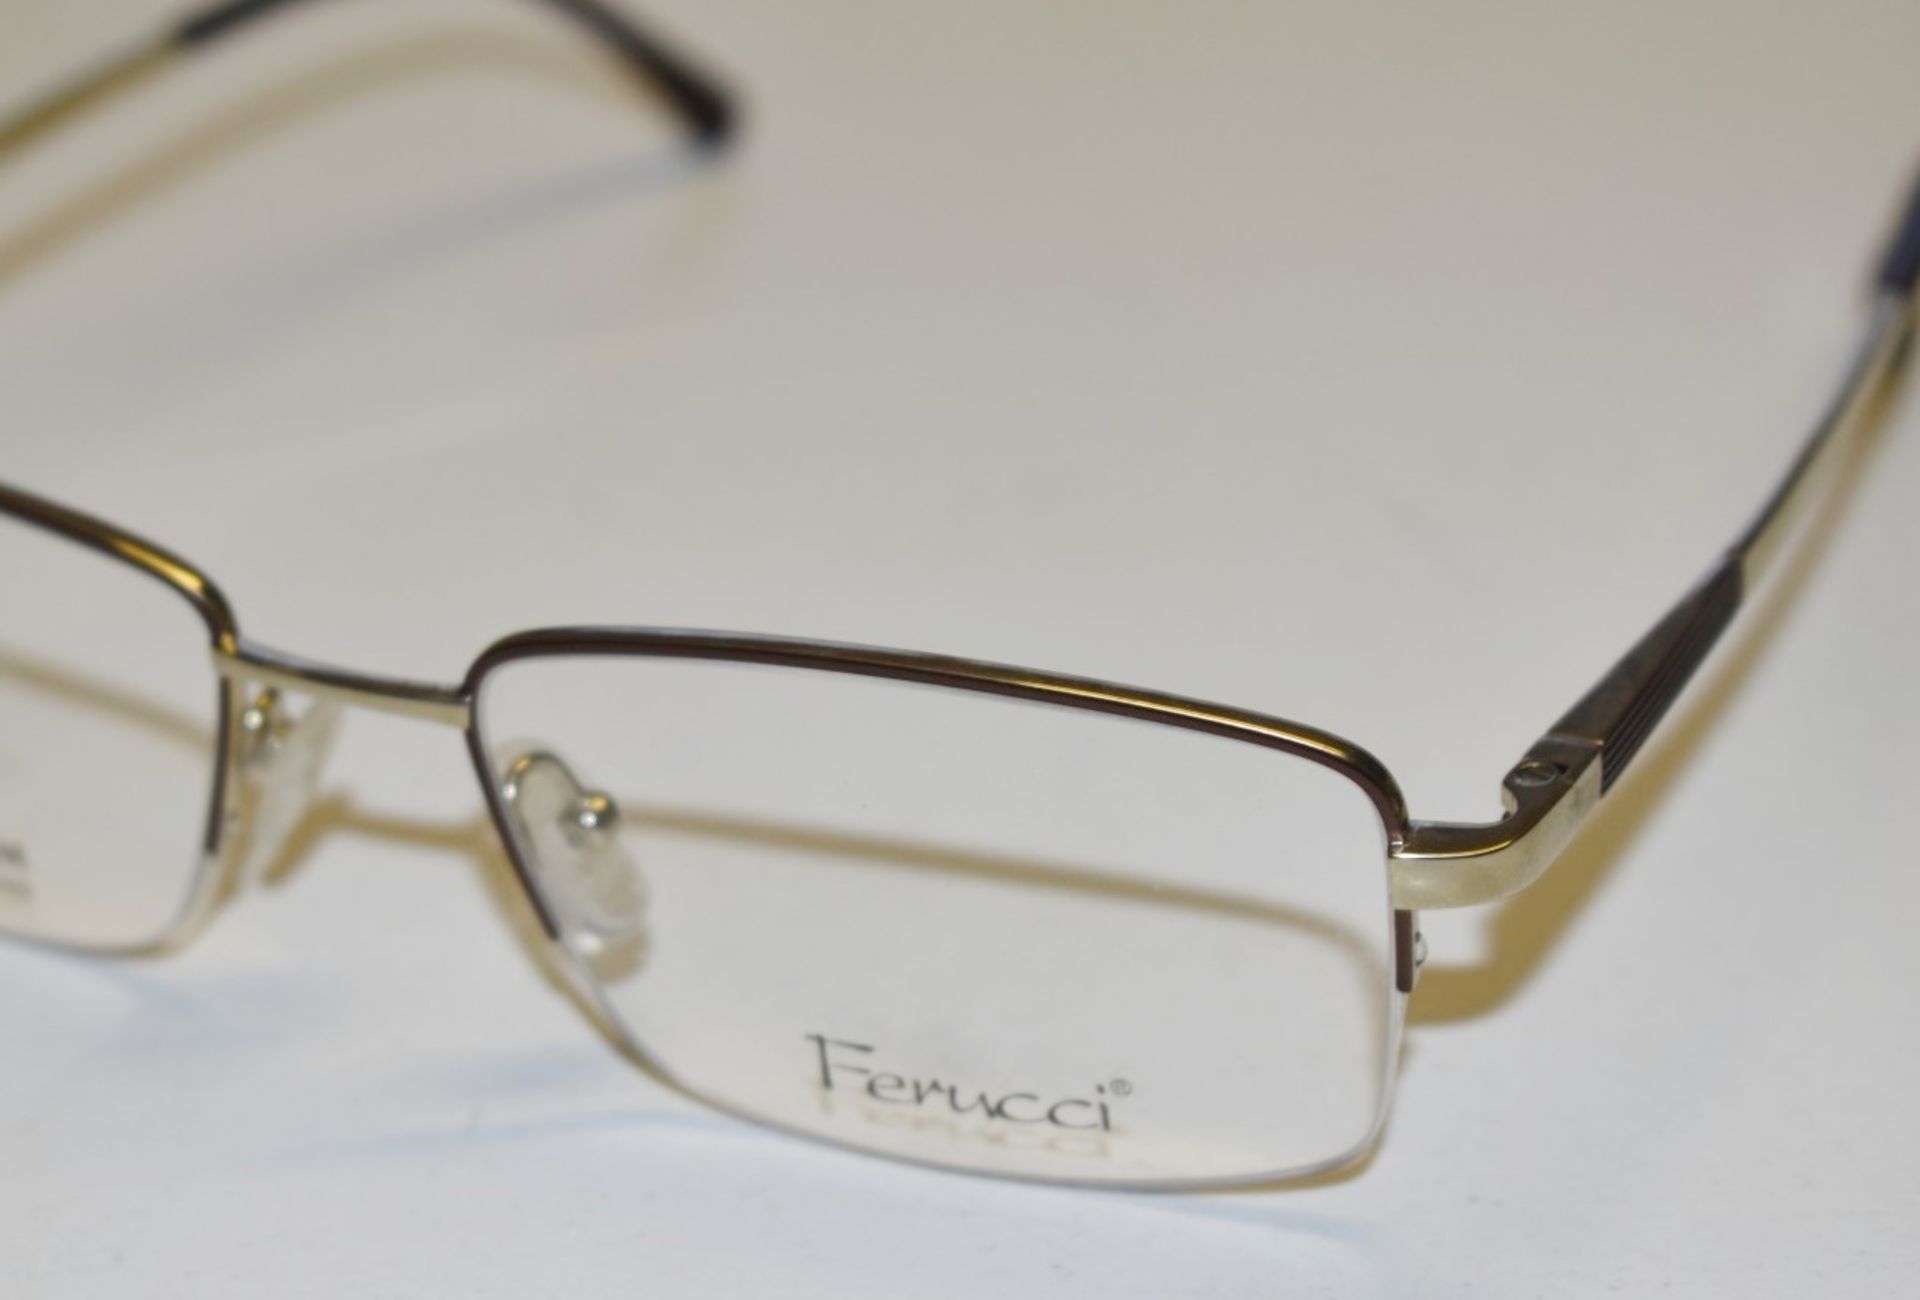 1 x Genuine FERUCCI Spectacle Eye Glasses Frame - Ex Display Stock  - Ref: GTI182 - CL645 - - Image 2 of 12